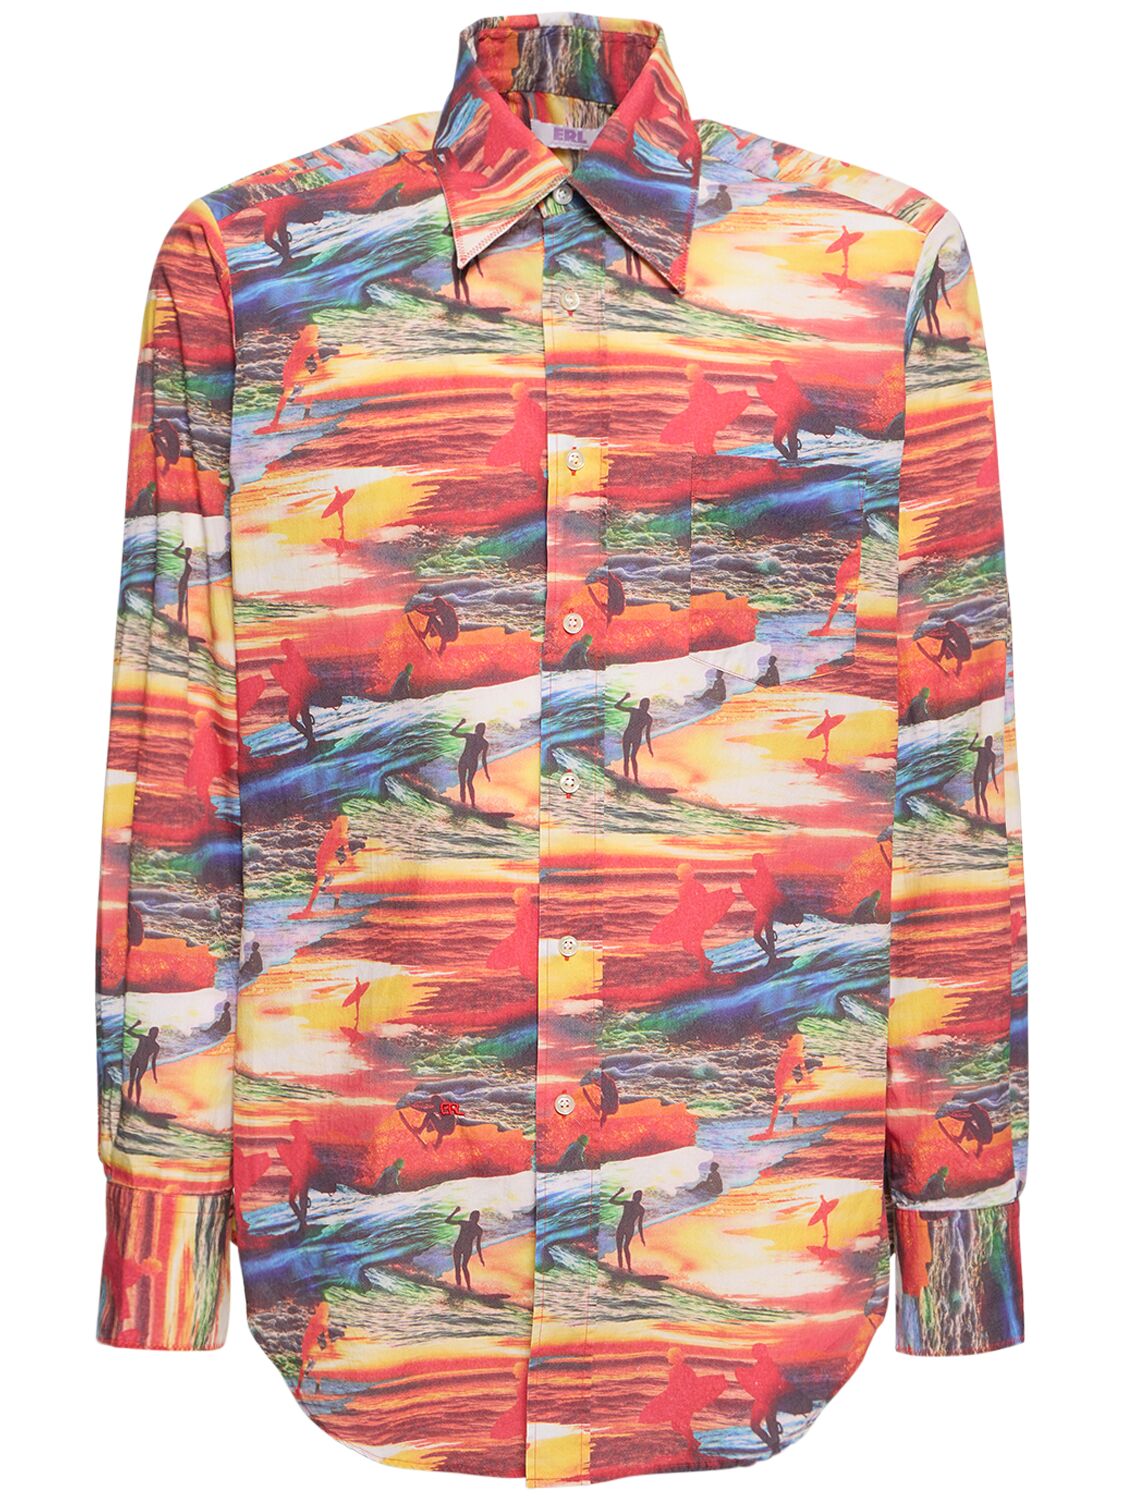 Image of Unisex Printed Woven Shirt